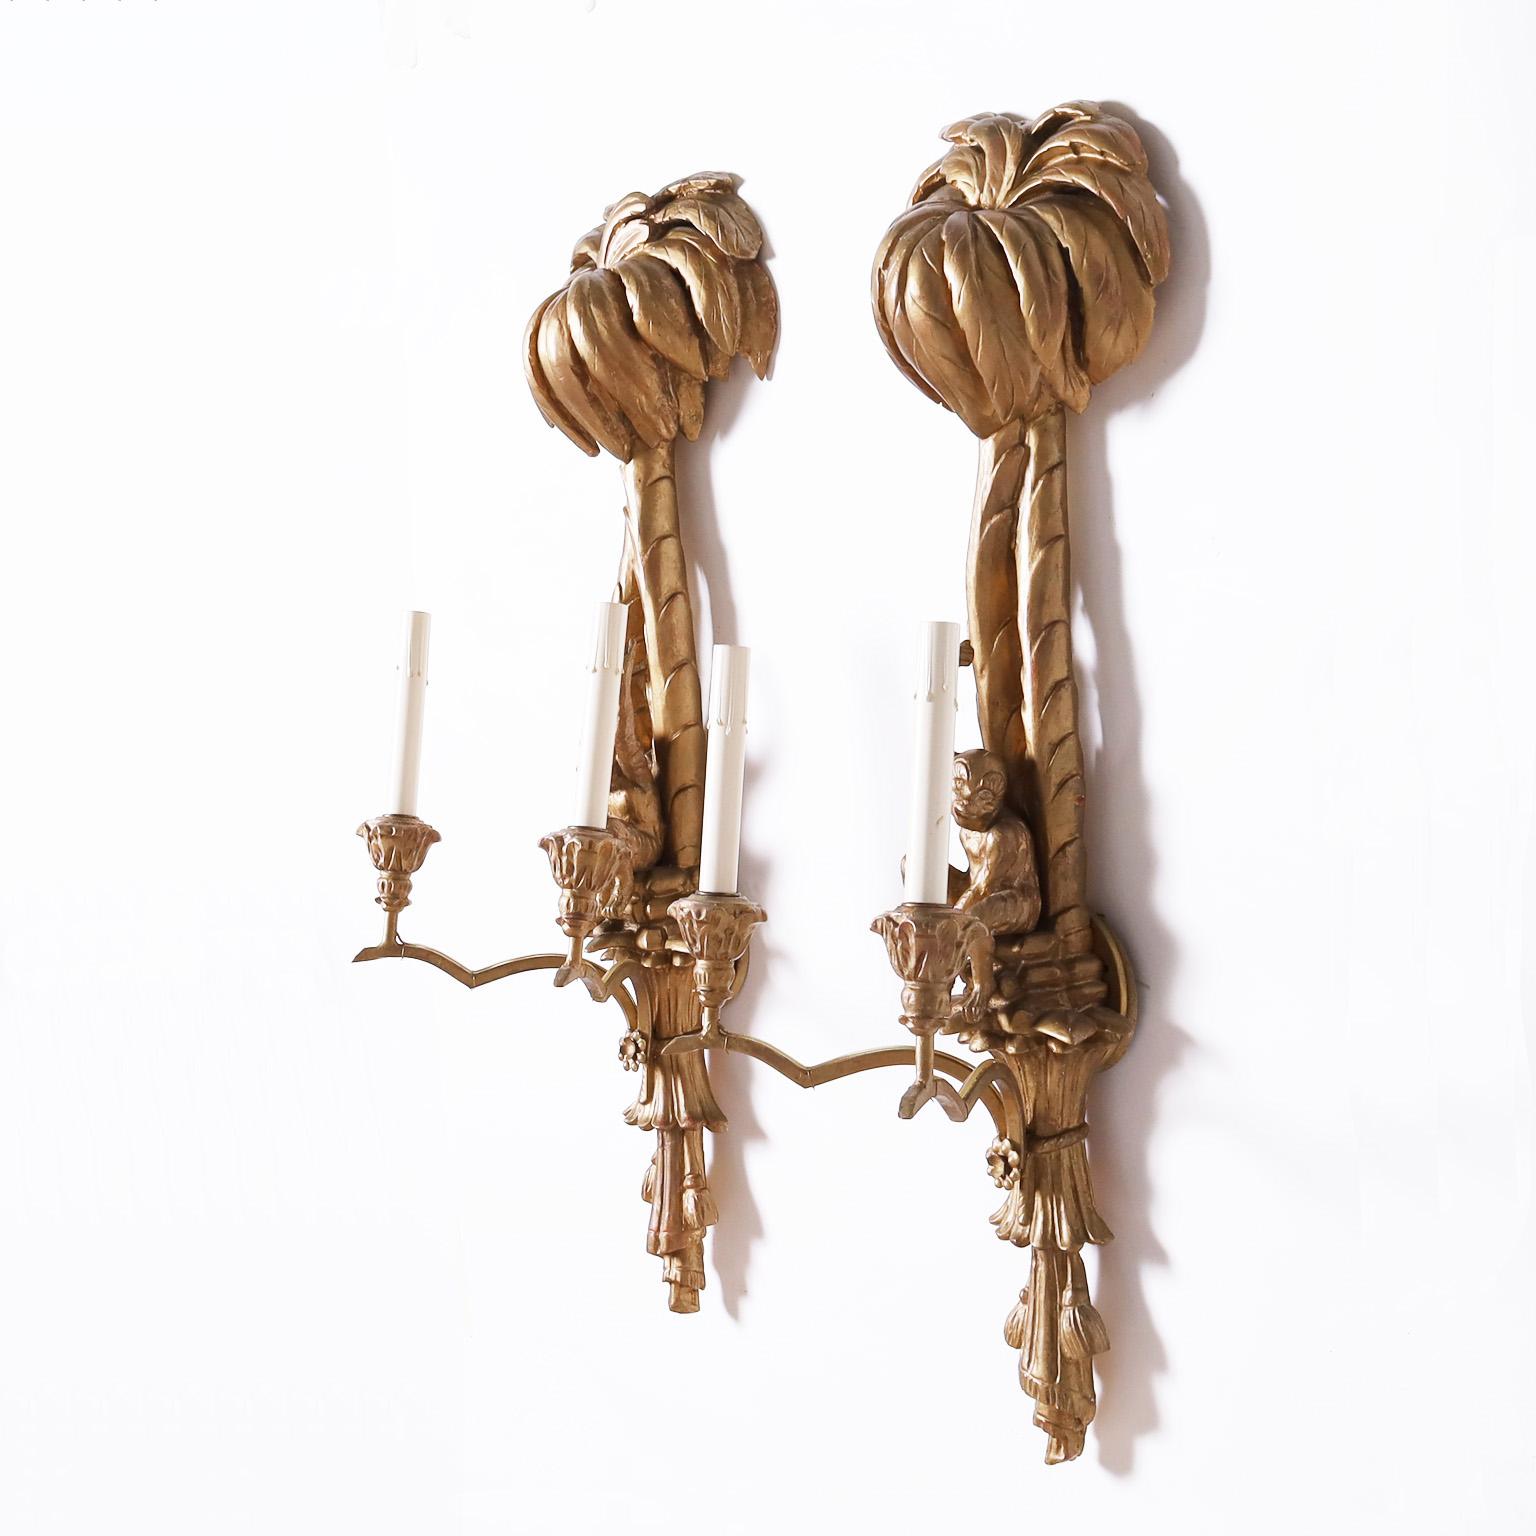 Rococo Revival Pair of Vintage Italian Gilt Wood Palm Tree Monkey Sconces For Sale